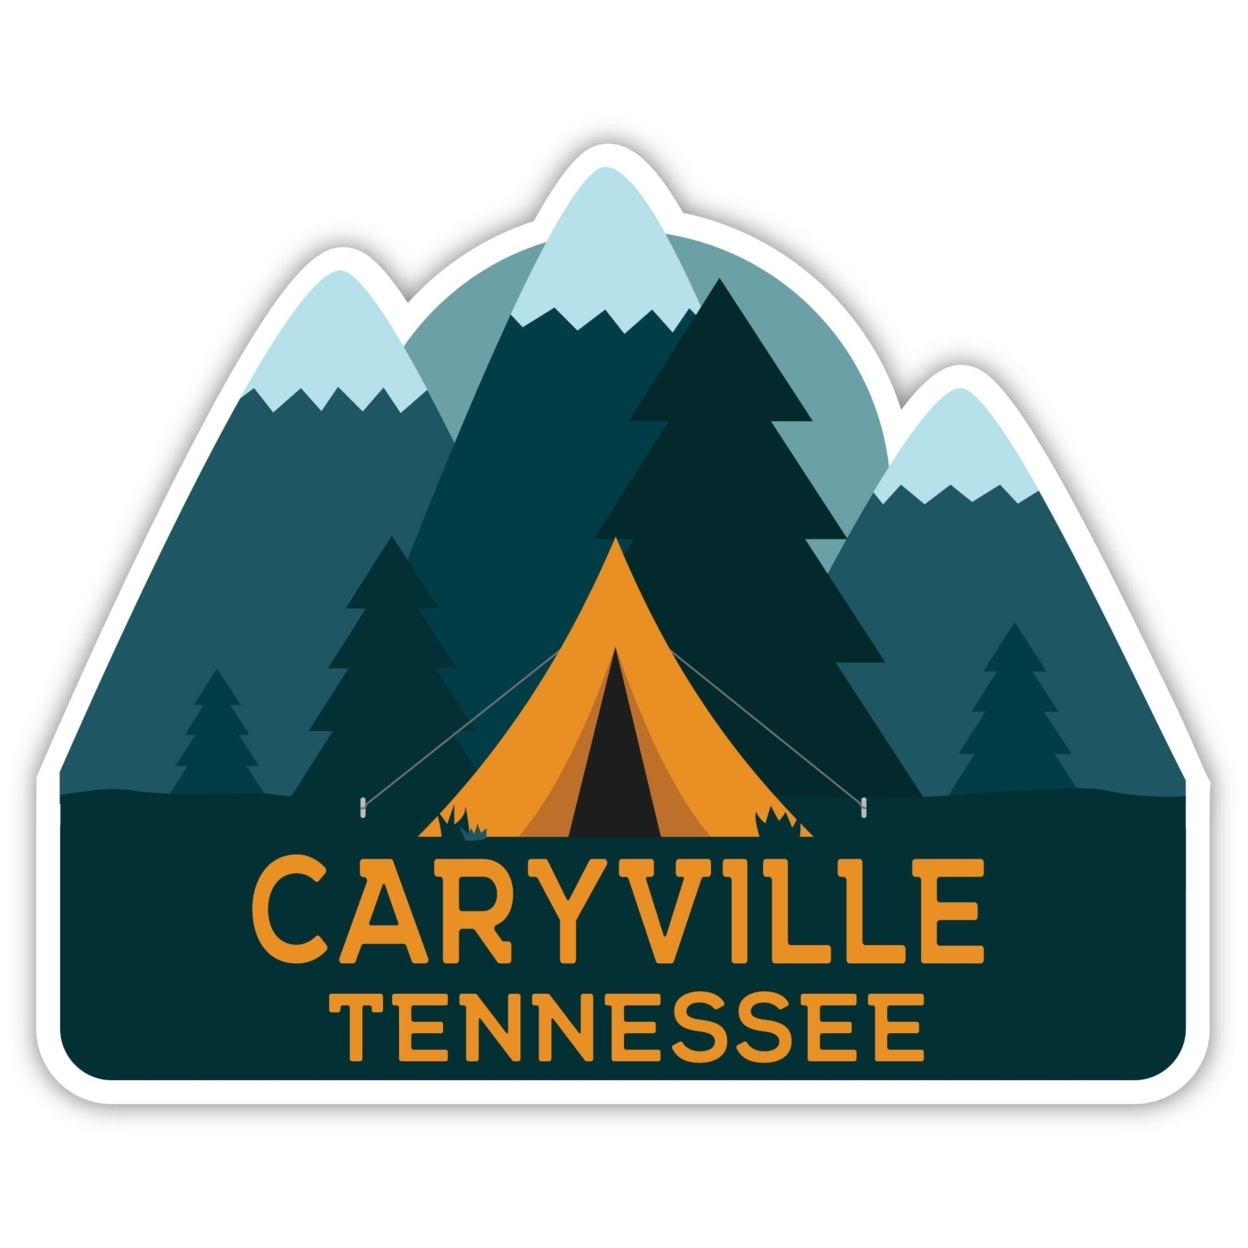 Caryville Tennessee Souvenir Decorative Stickers (Choose Theme And Size) - Single Unit, 6-Inch, Bear